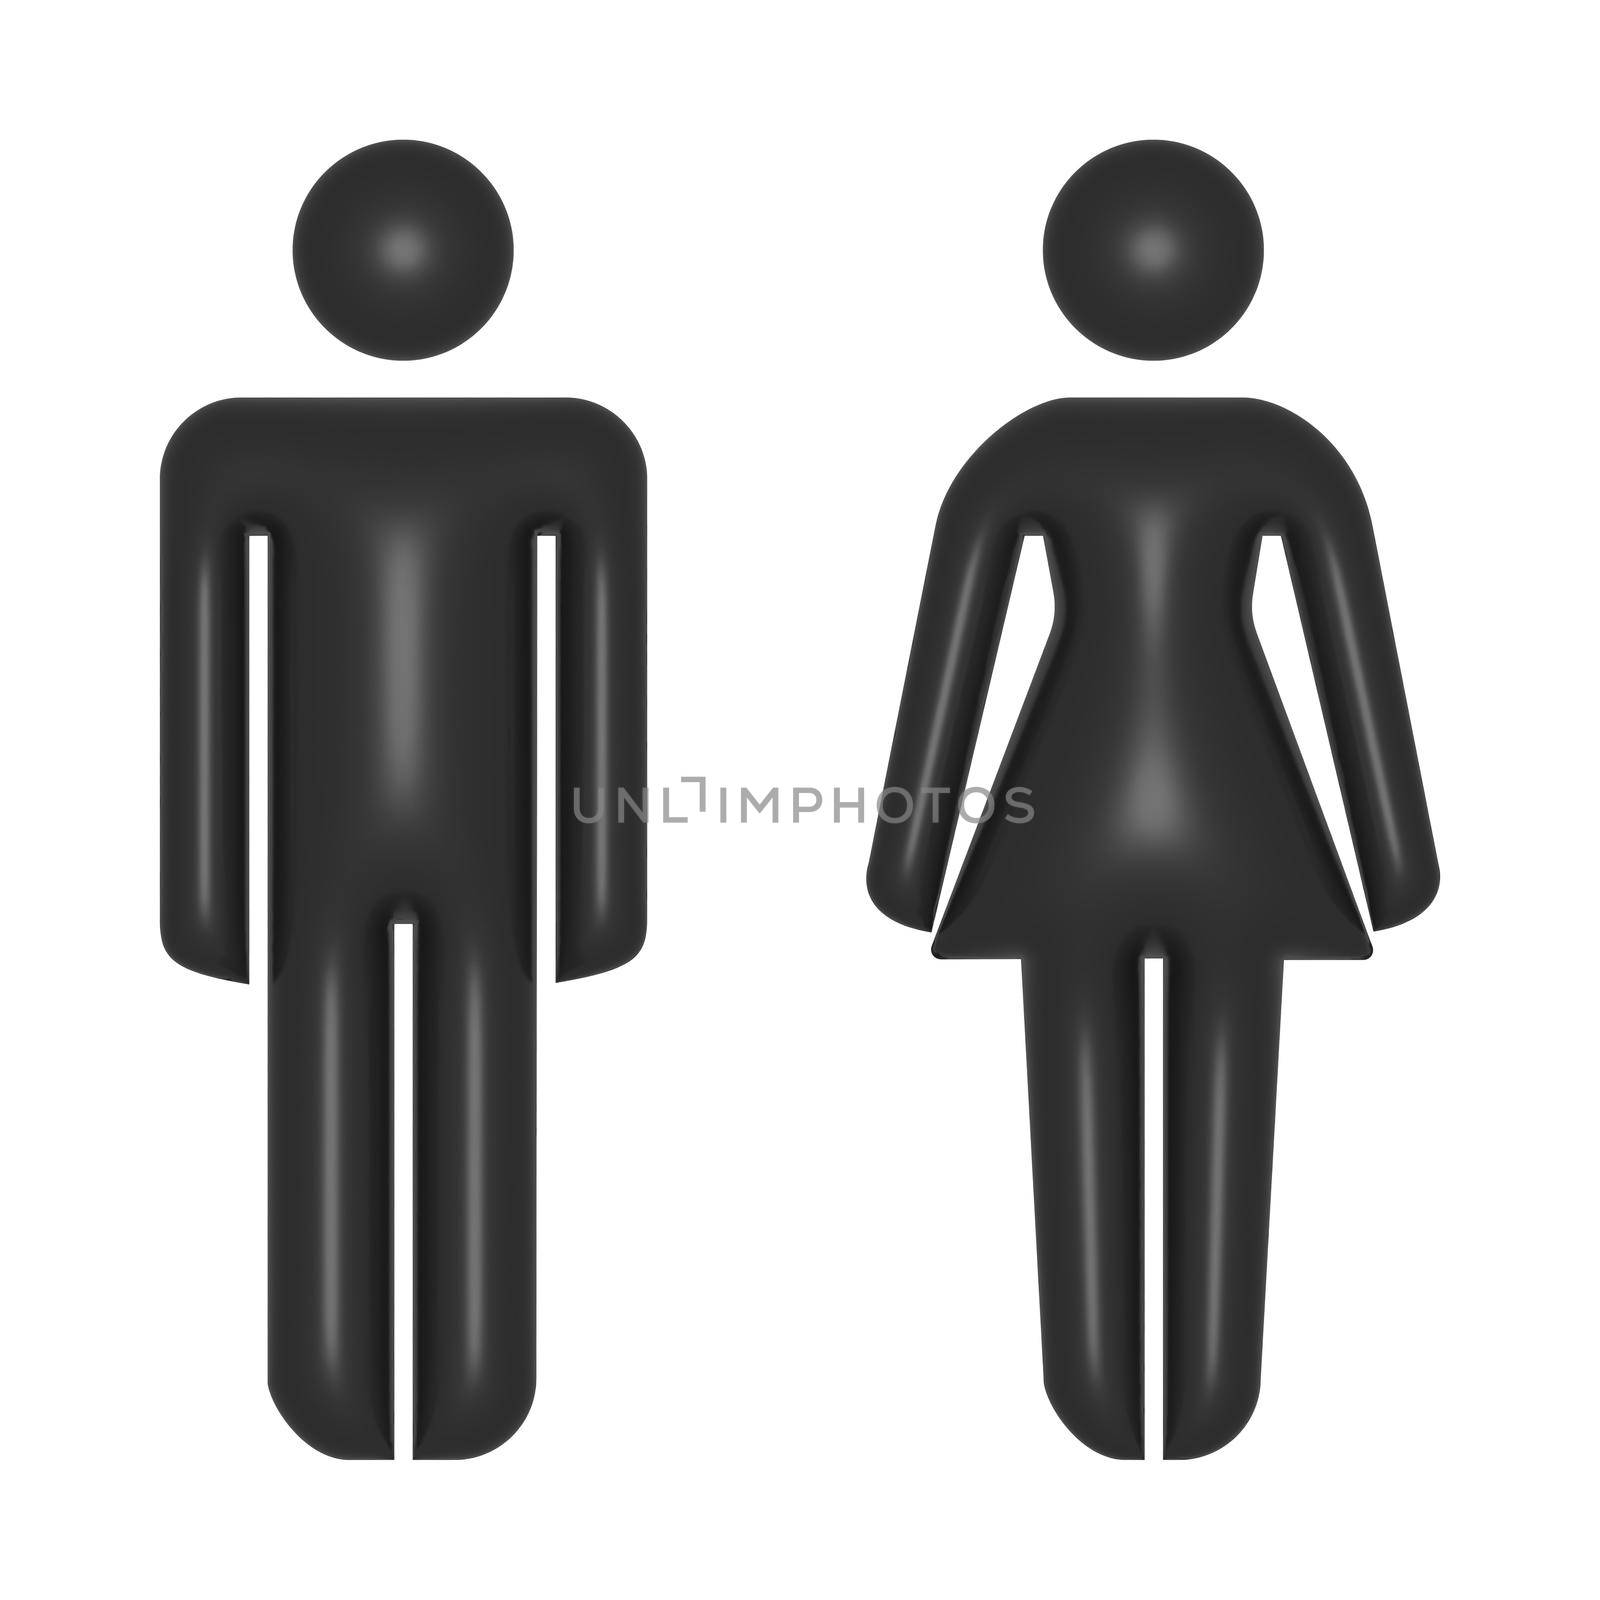 Symbol sign male and female toilet, 3D image by BEMPhoto